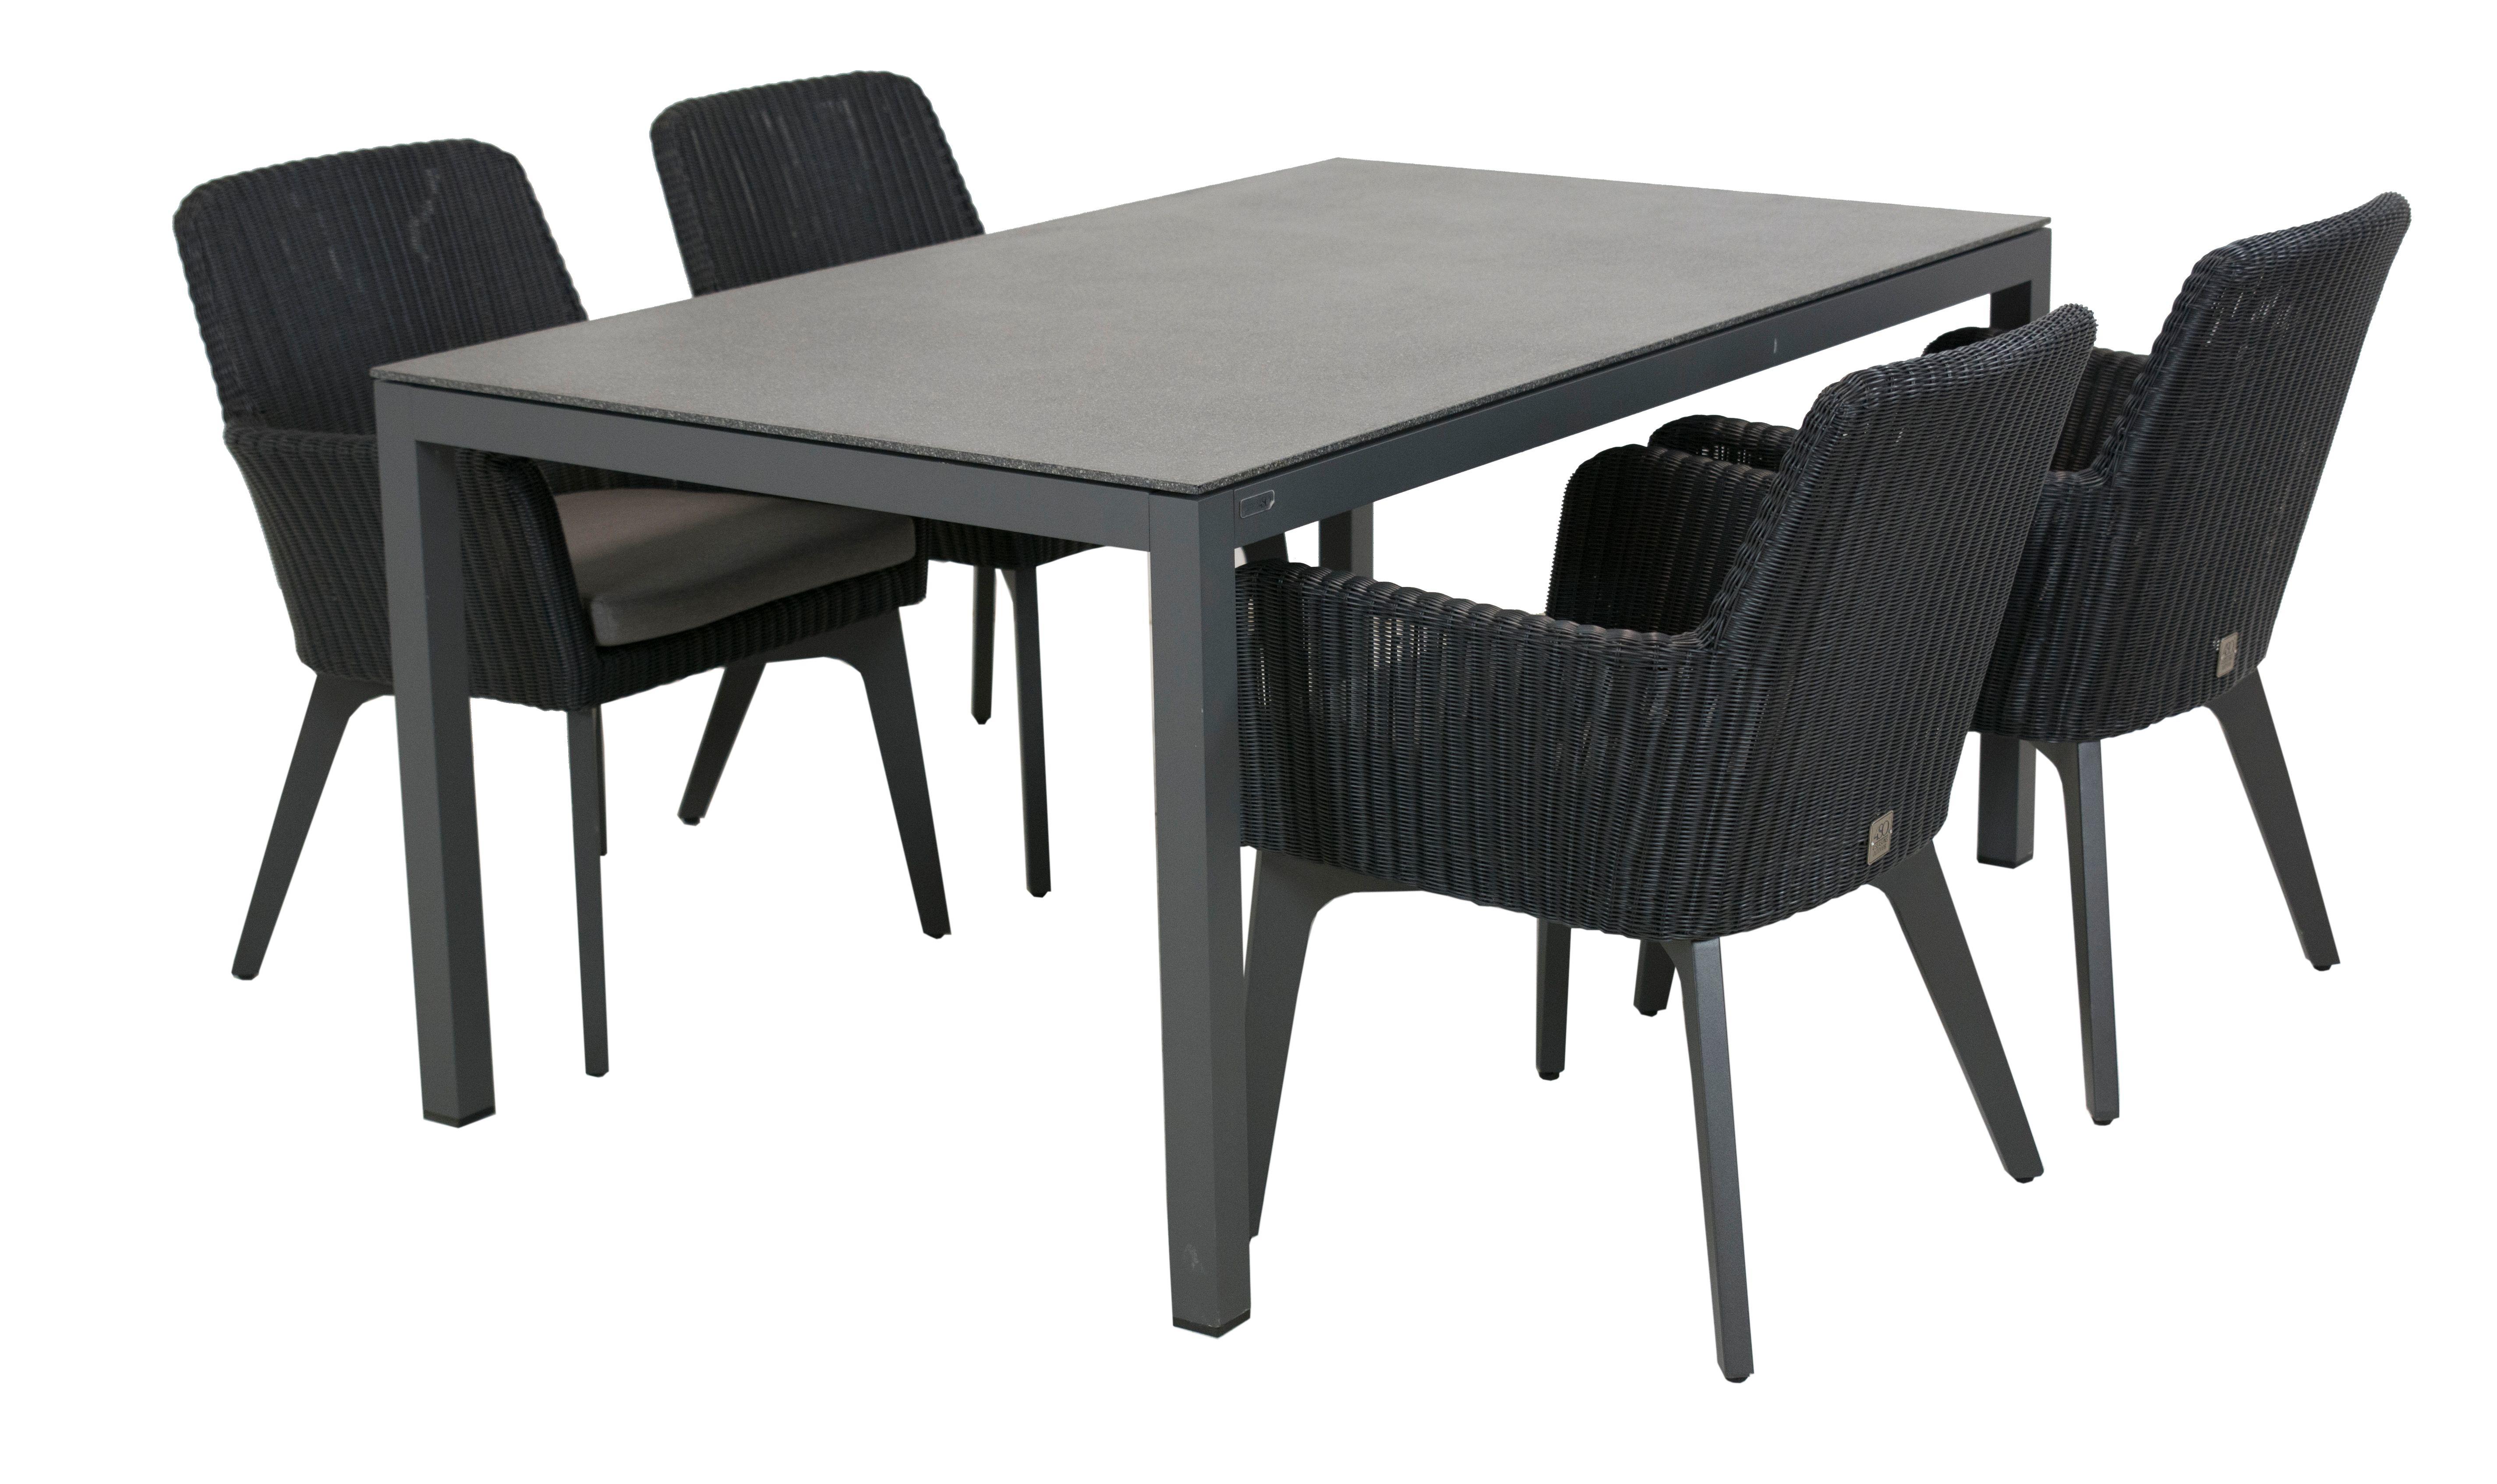 160 cm HPL and aluminium garden dining table and 4 rattan wicker dining chairs